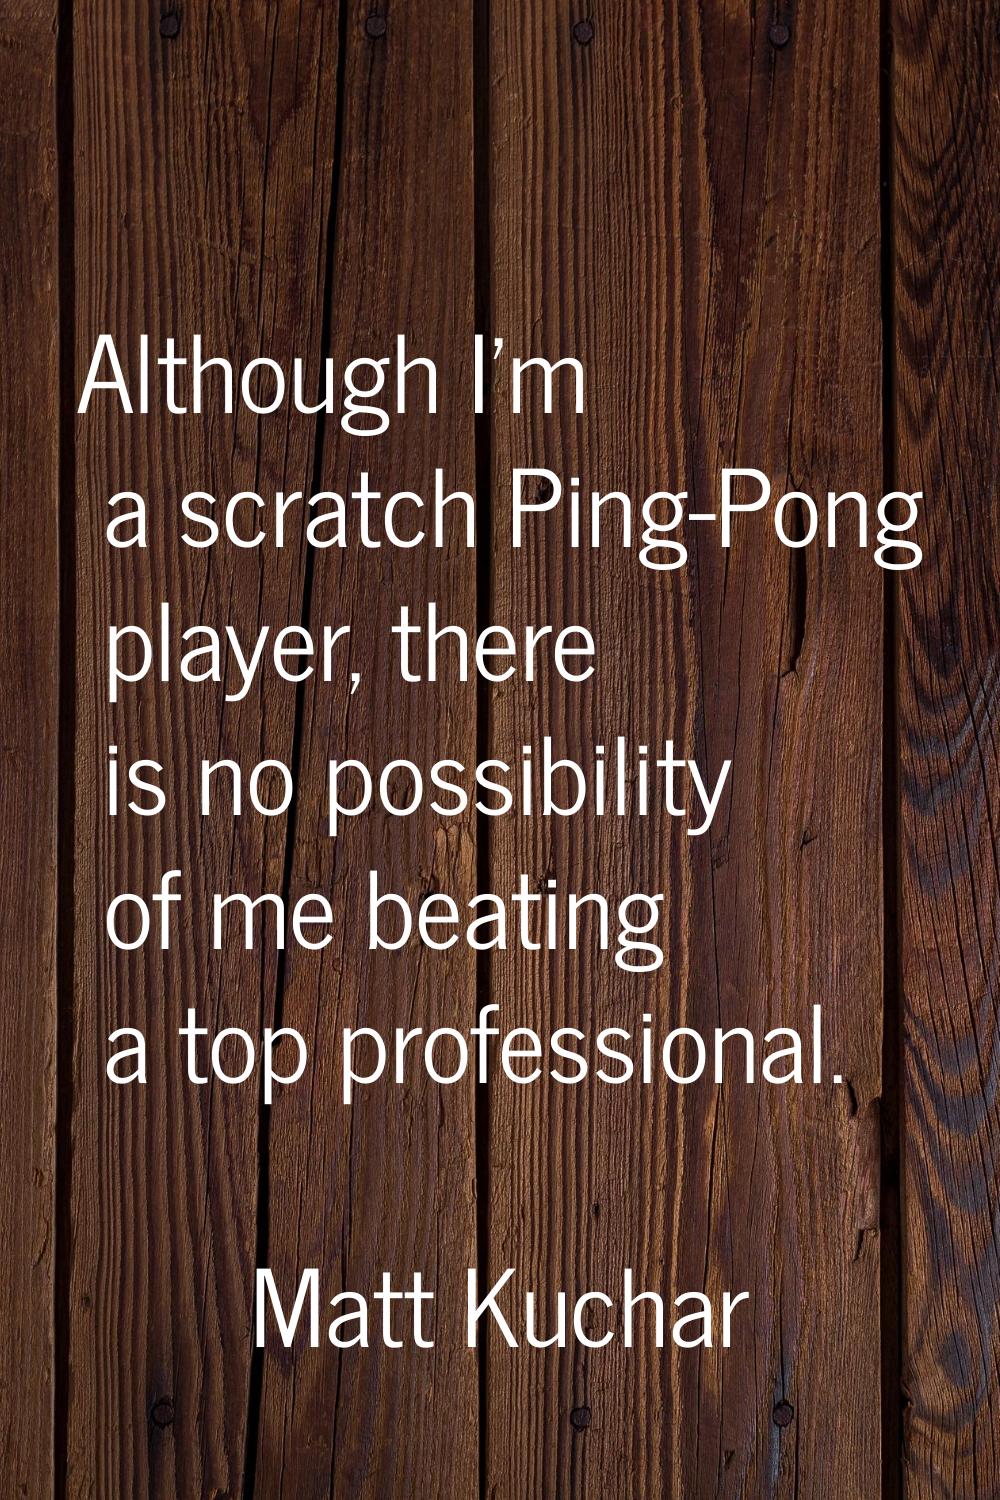 Although I'm a scratch Ping-Pong player, there is no possibility of me beating a top professional.